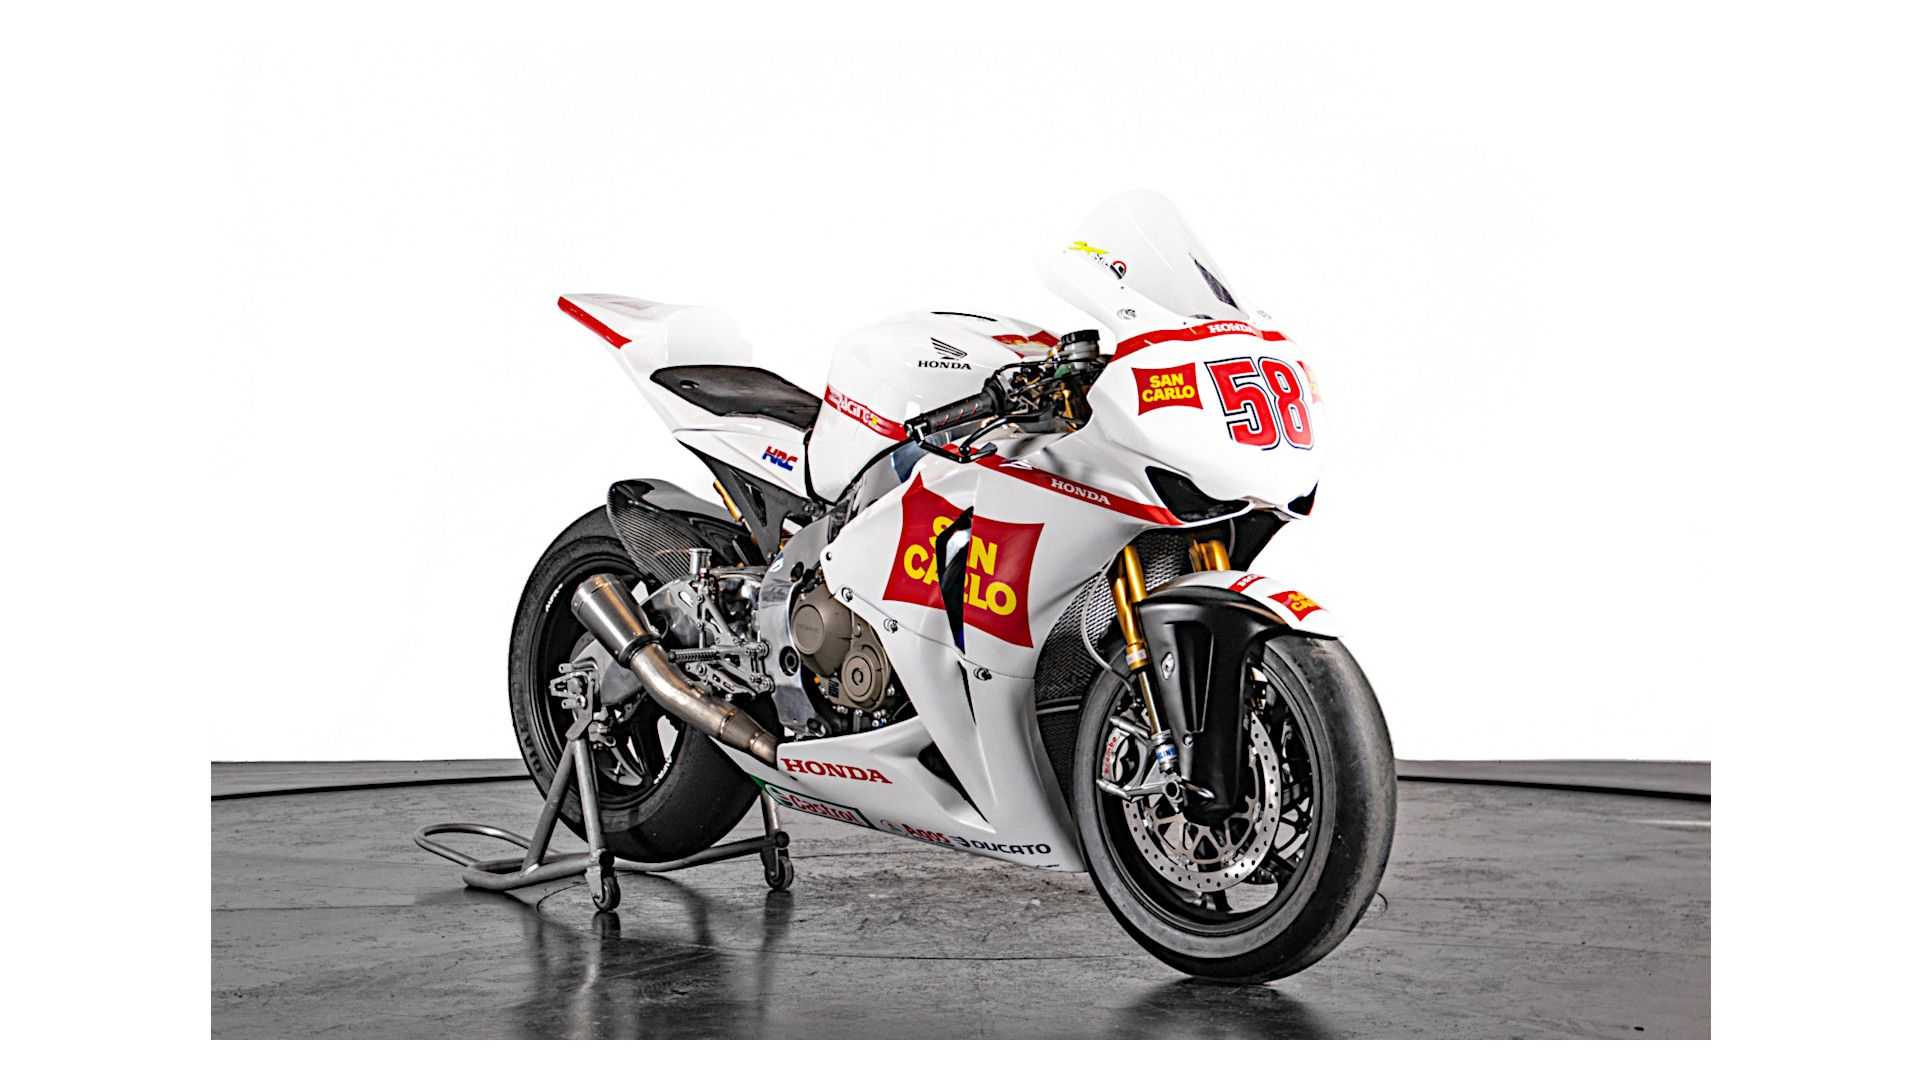 Test bike of Marco Simoncelli #58 is for sale
- also in the MOTORCYCLES.NEWS APP